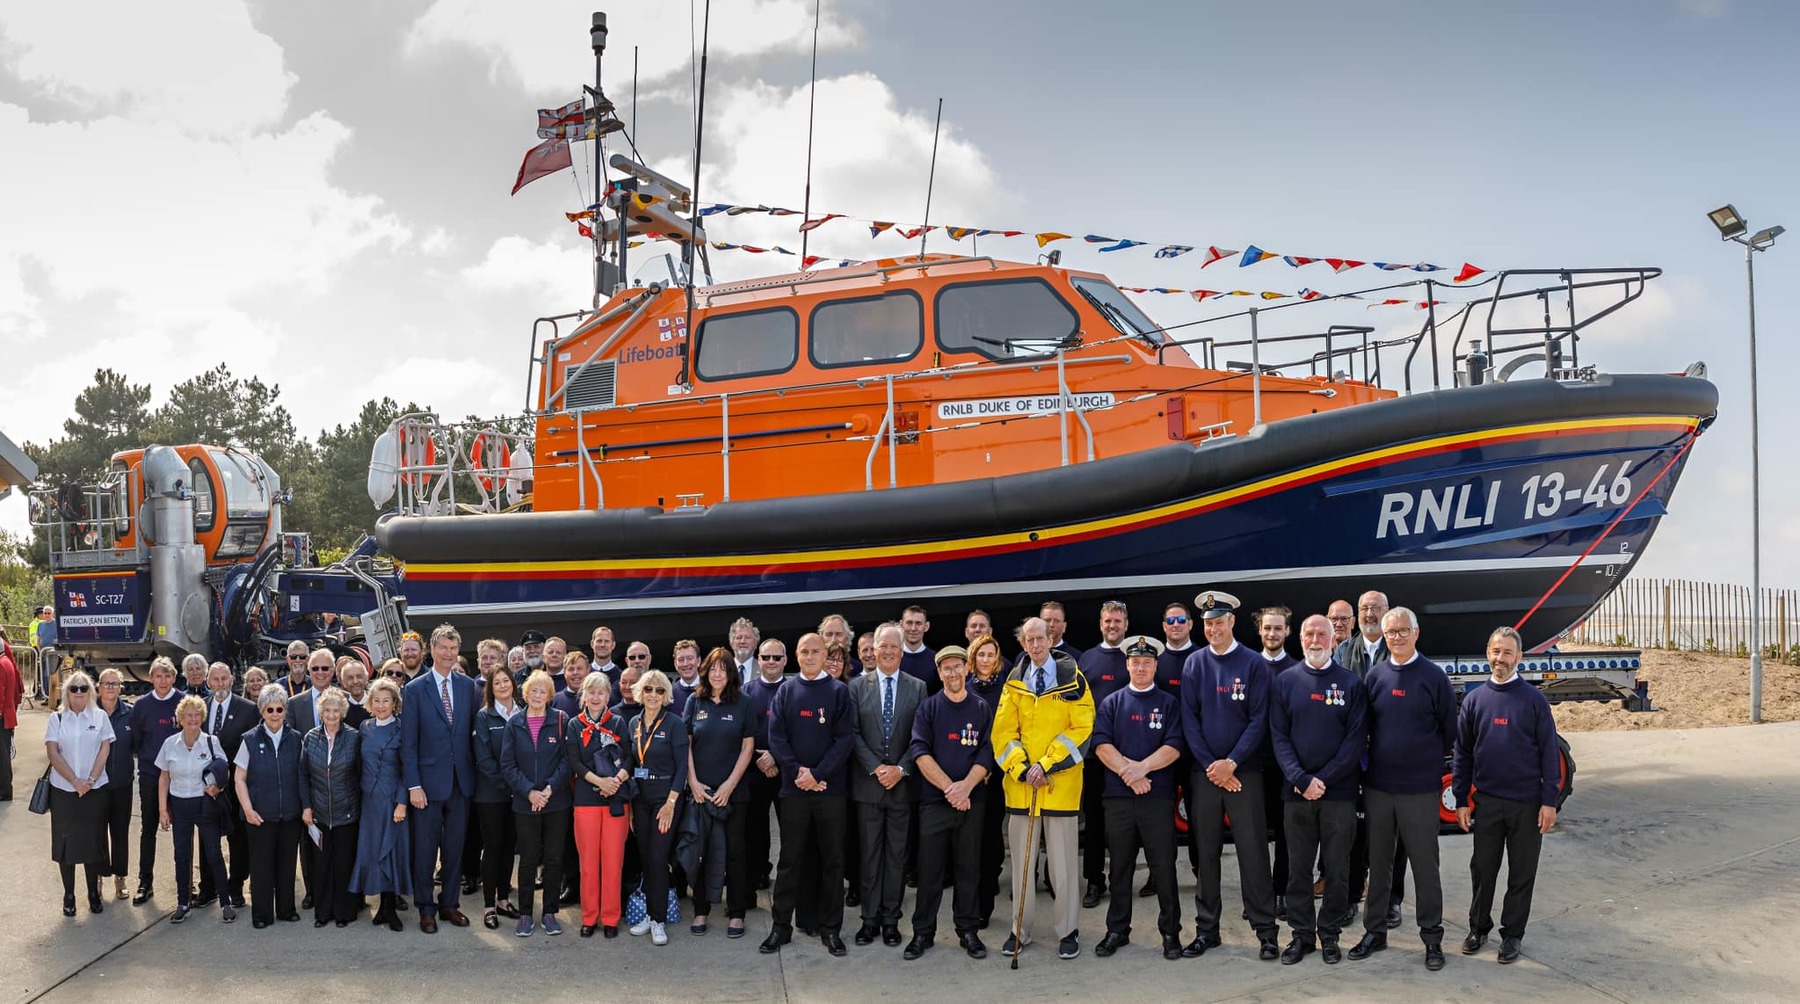 HRH The Duke of Kent (yellow jacket) with VIP guests and the crew at the naming of the new lifeboat